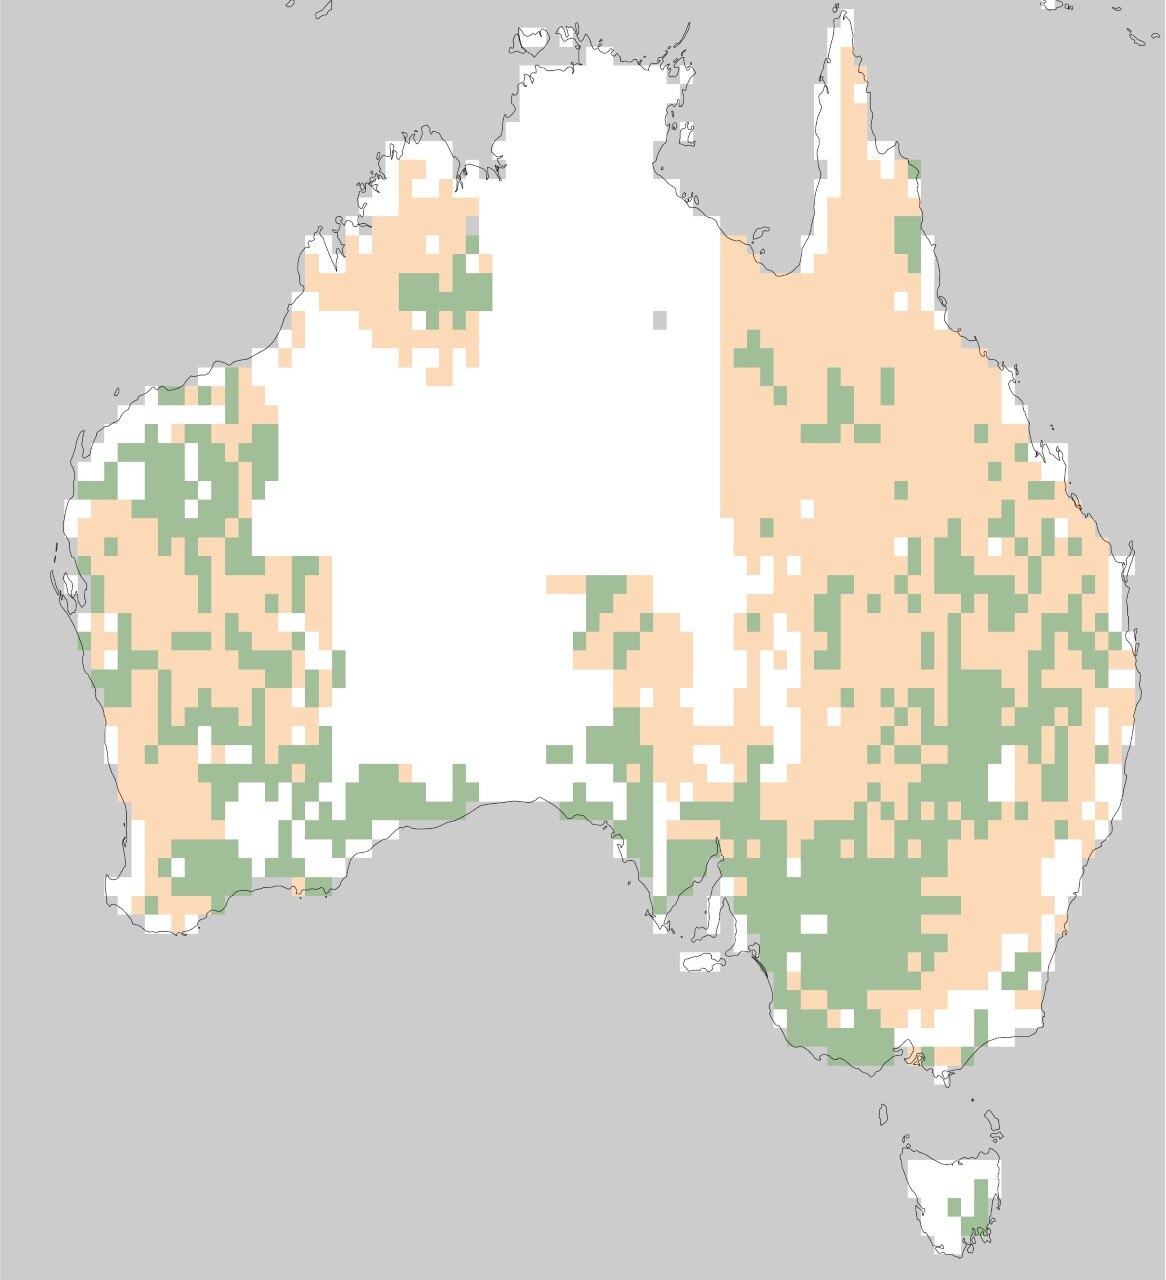 A map of Australia showing where glyphosate contamination exists